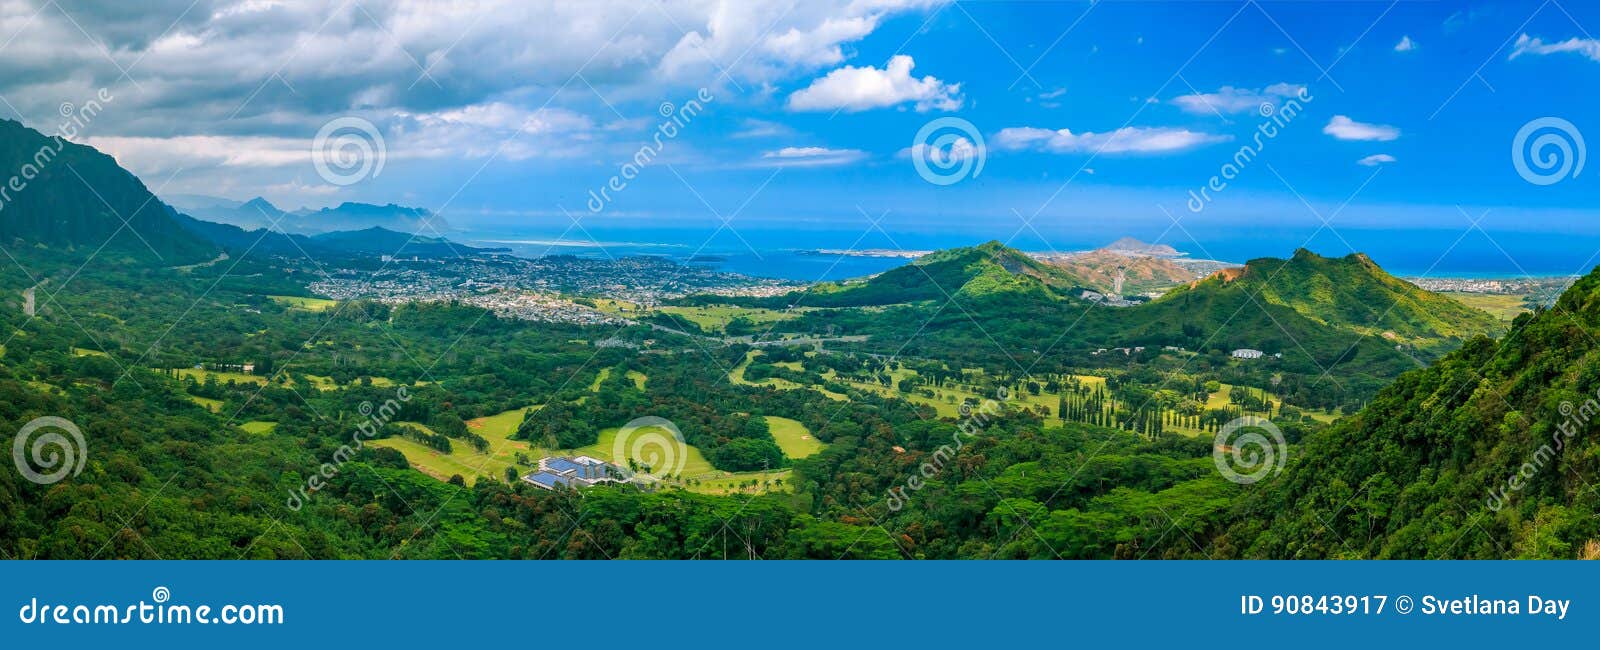 hdr panorama over green mountains of nu`uanu pali lookout in oah